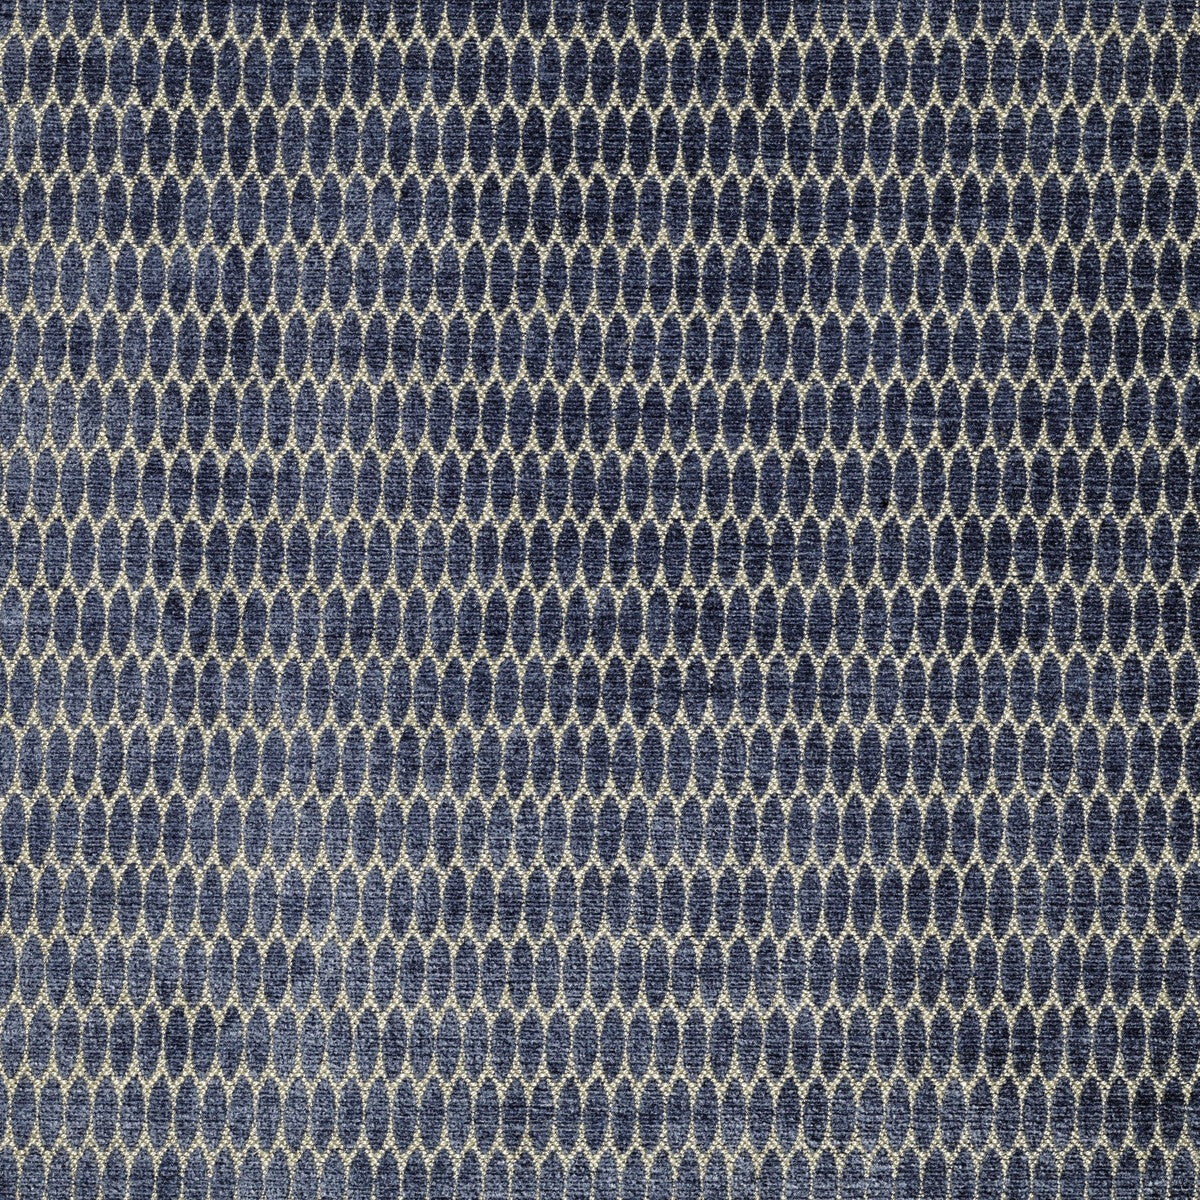 Compton fabric in dark blue color - pattern BFC-3658.50.0 - by Lee Jofa in the Blithfield collection